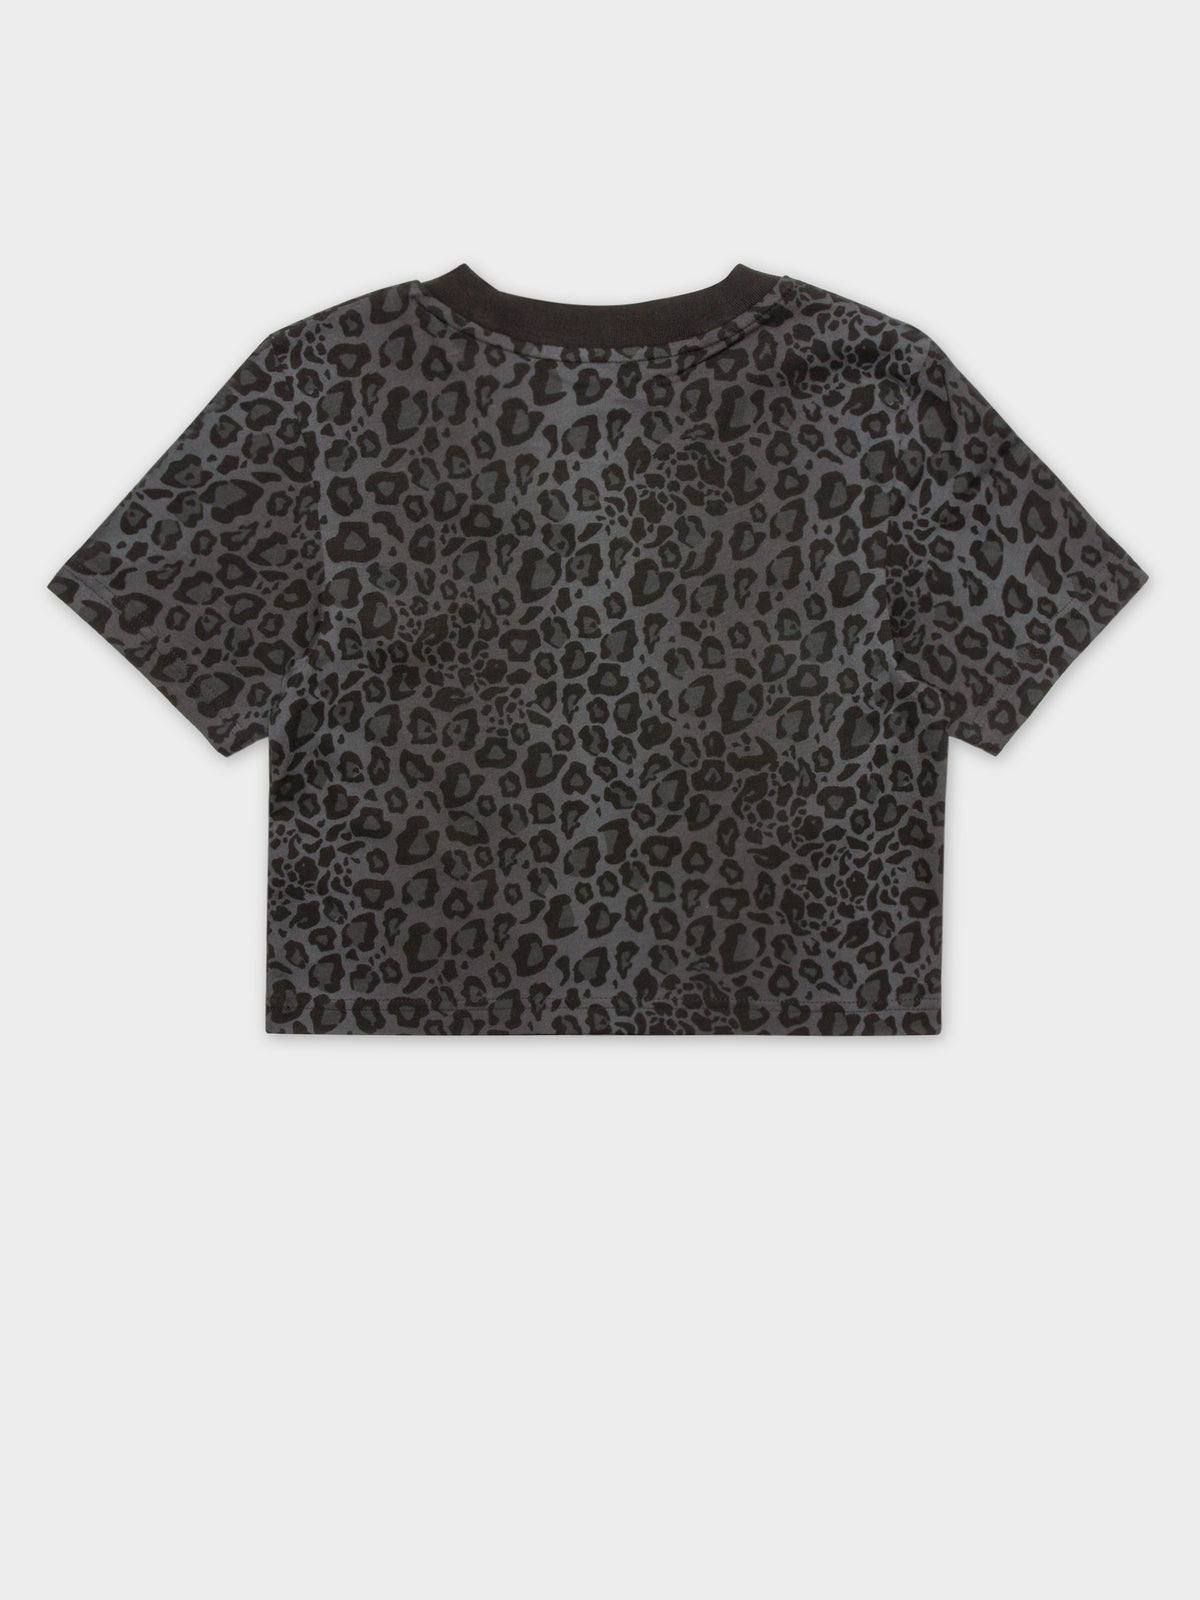 Cropped T-Shirt in Black Leopard